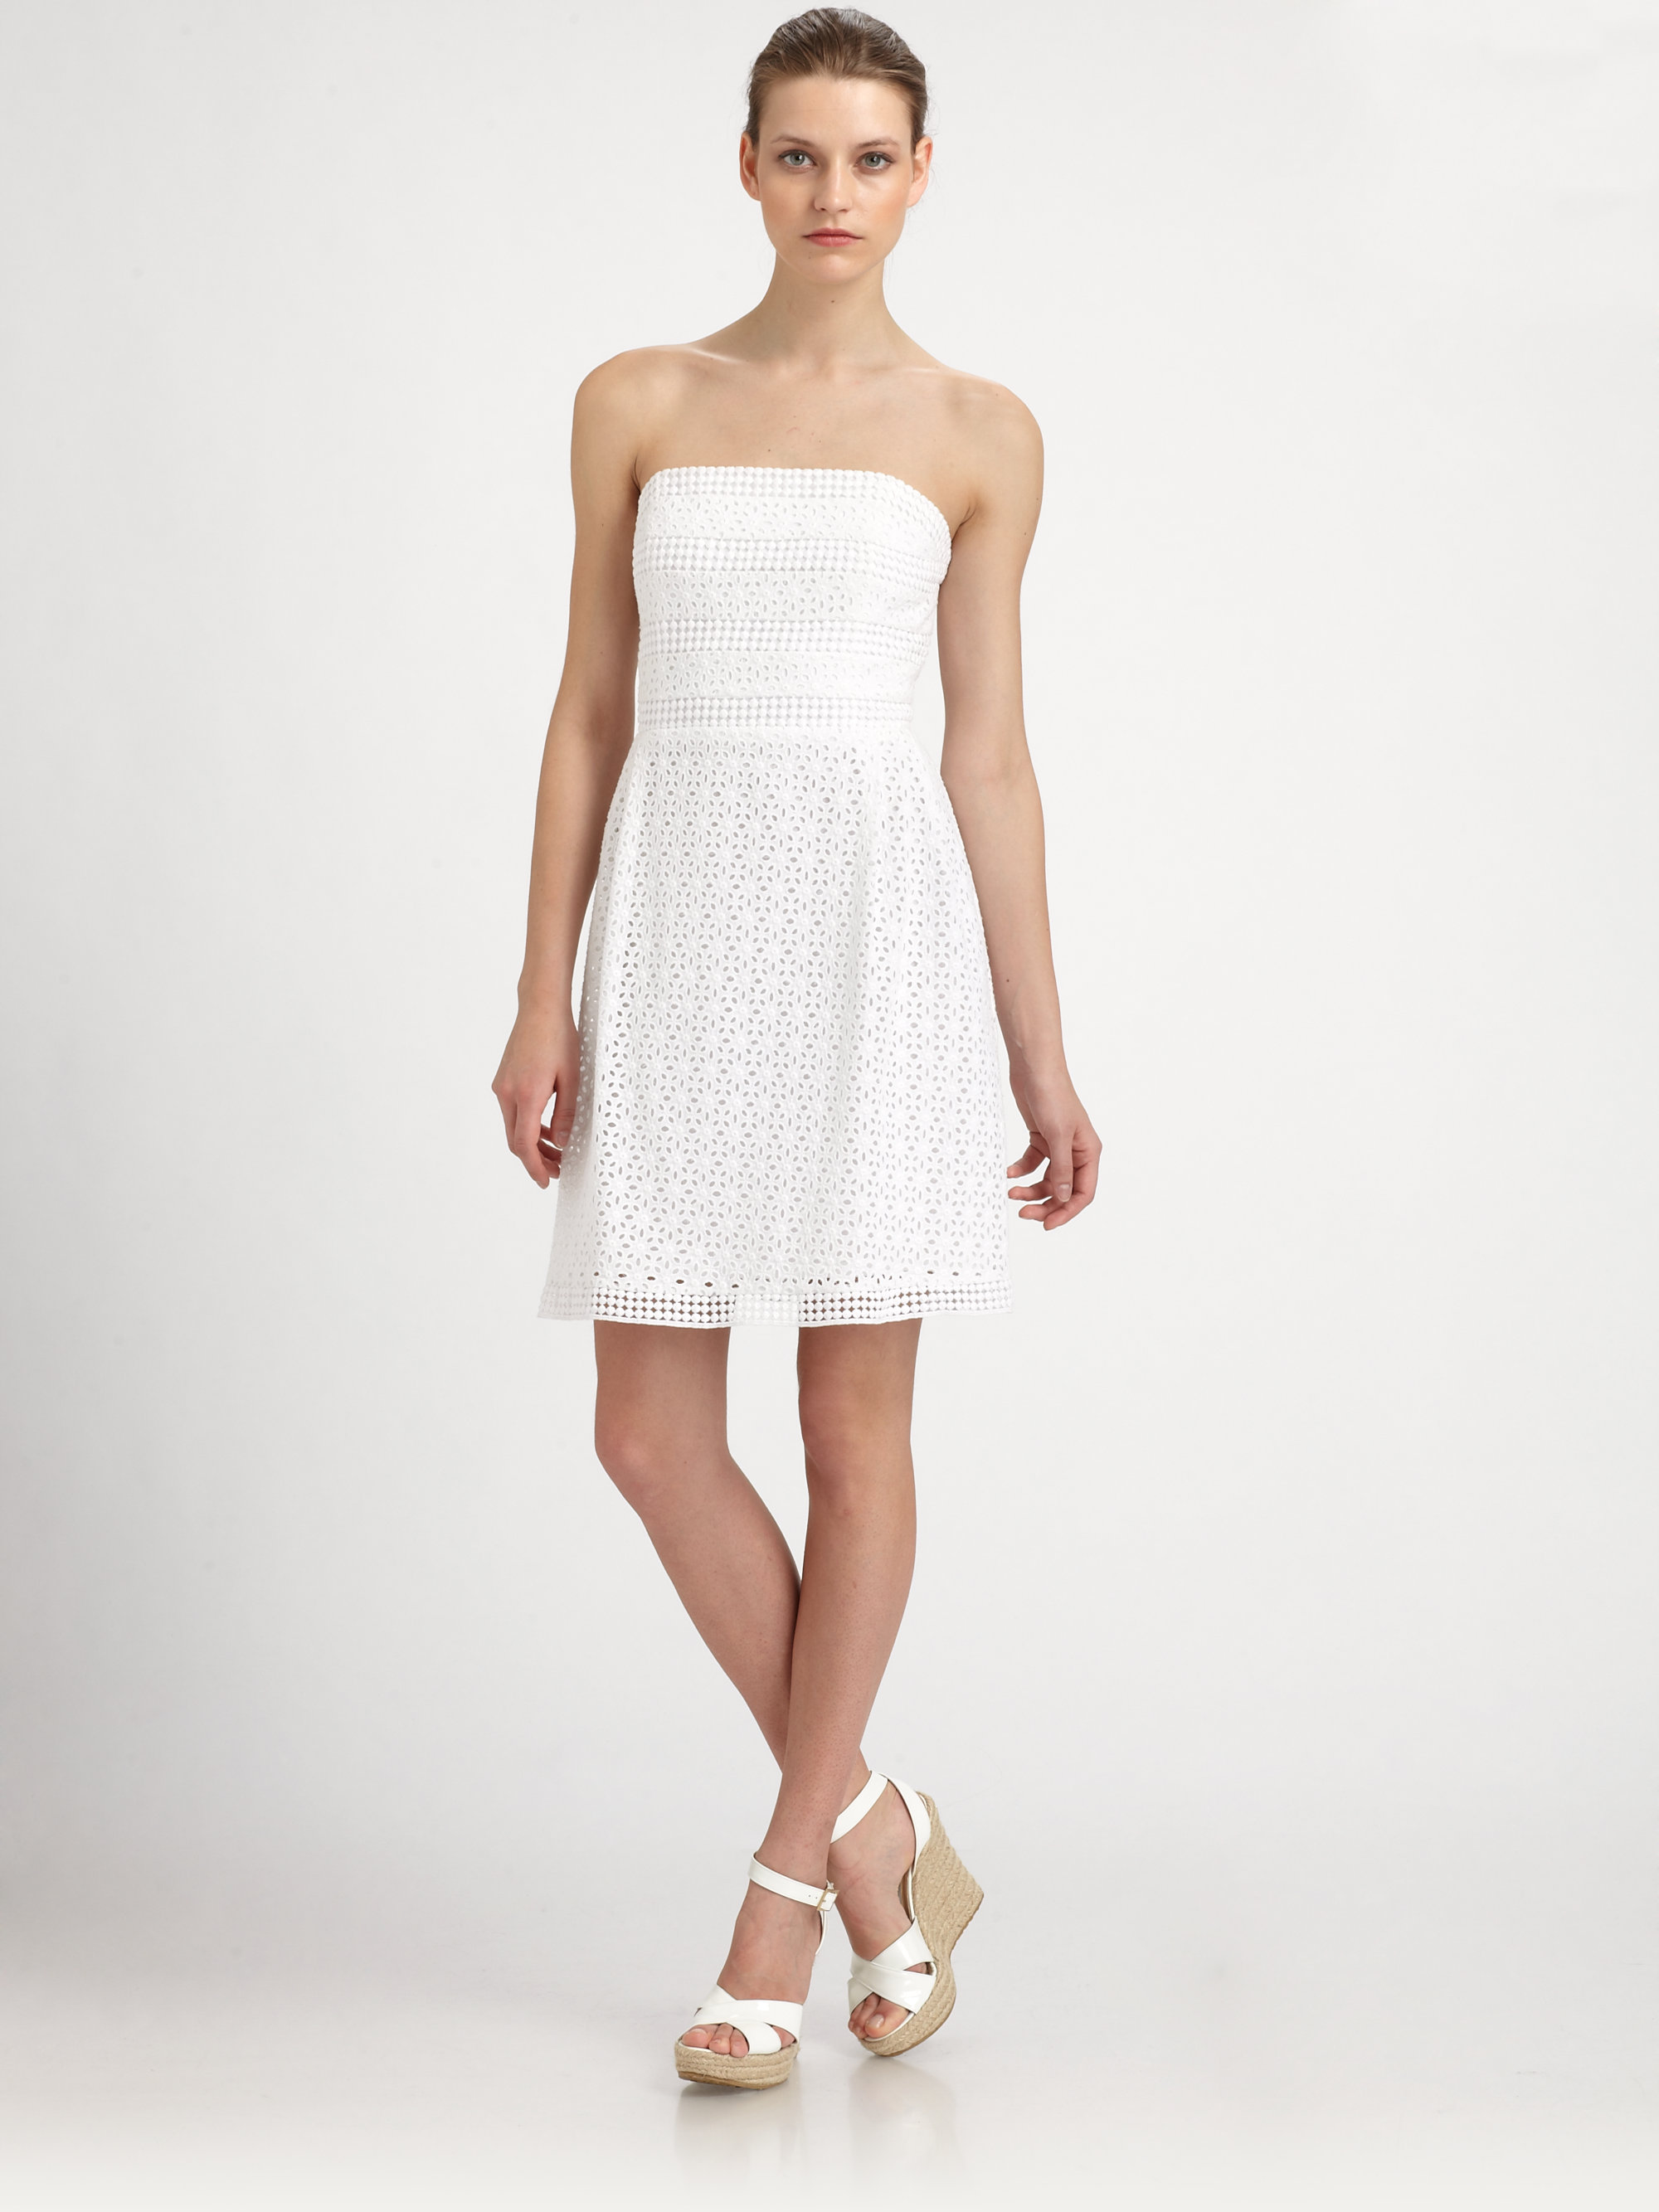 Laundry by shelli segal Strapless Cotton Eyelet Dress in ...